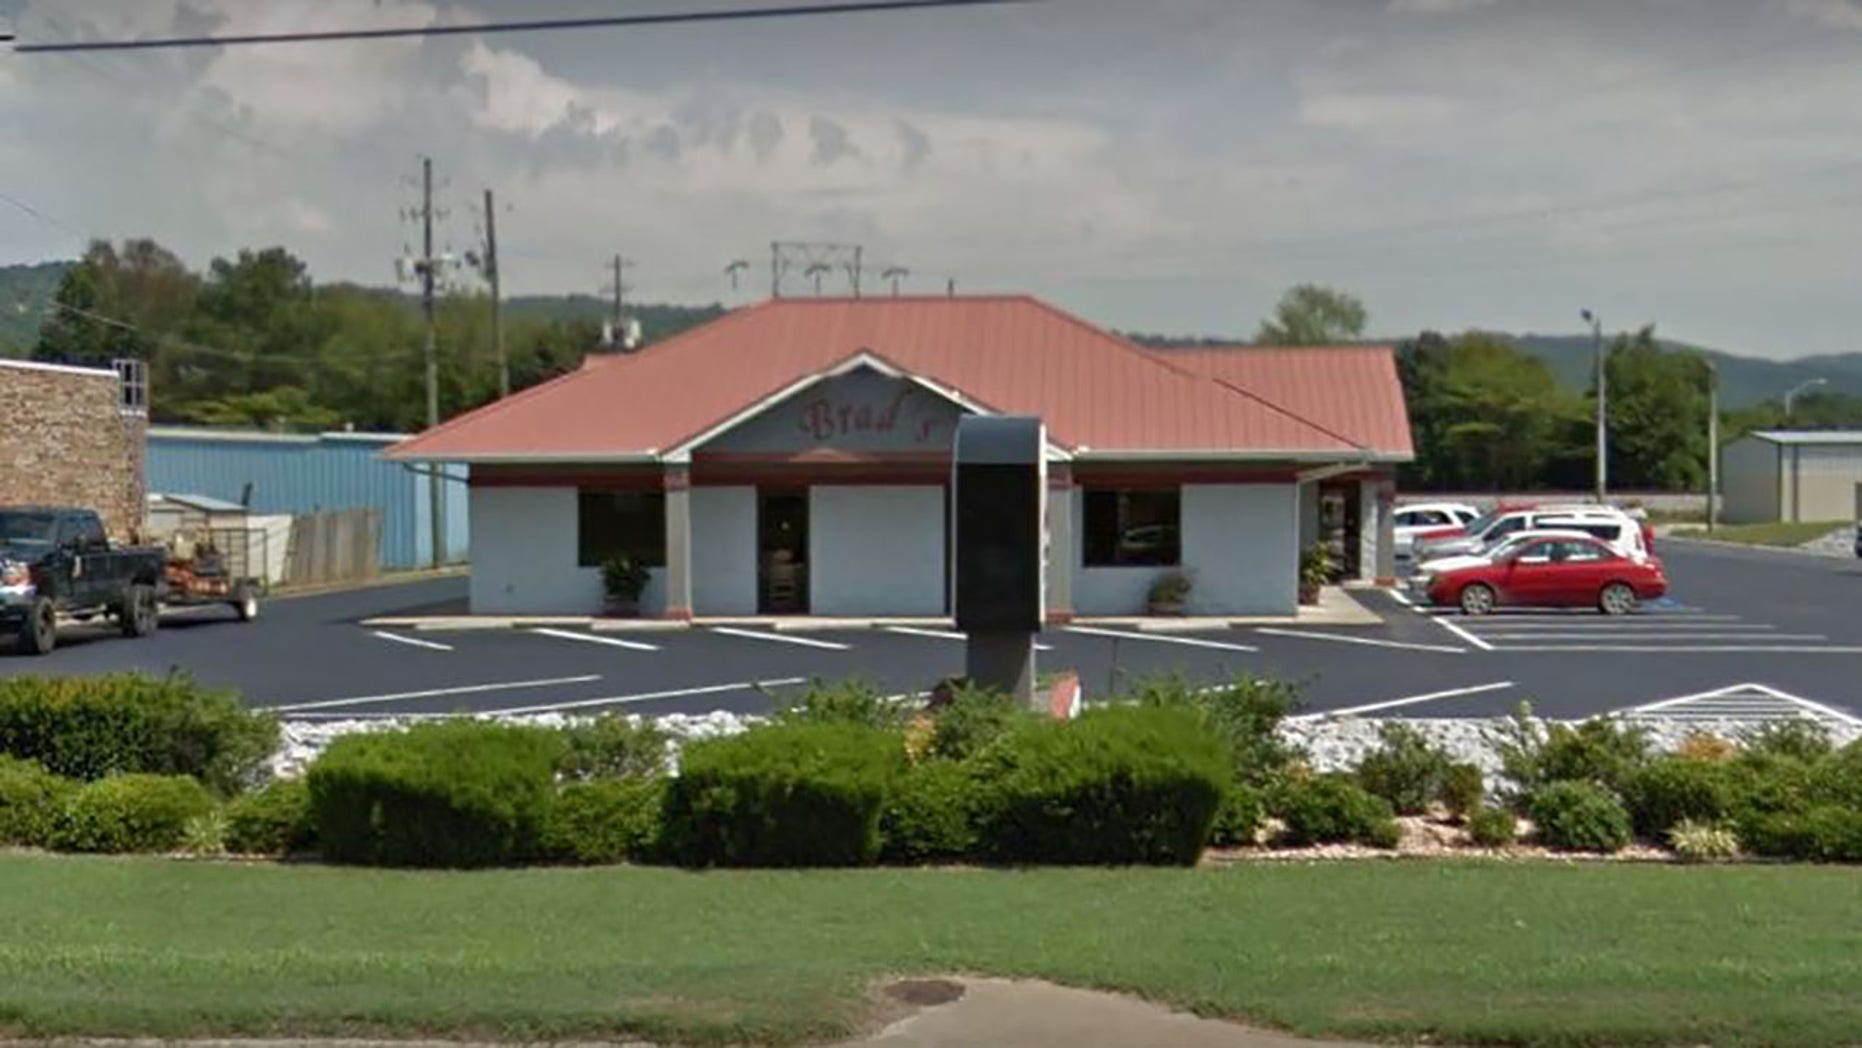 The men were dining at Brad's BBQ in Oxford, Alabama when they met the widow.